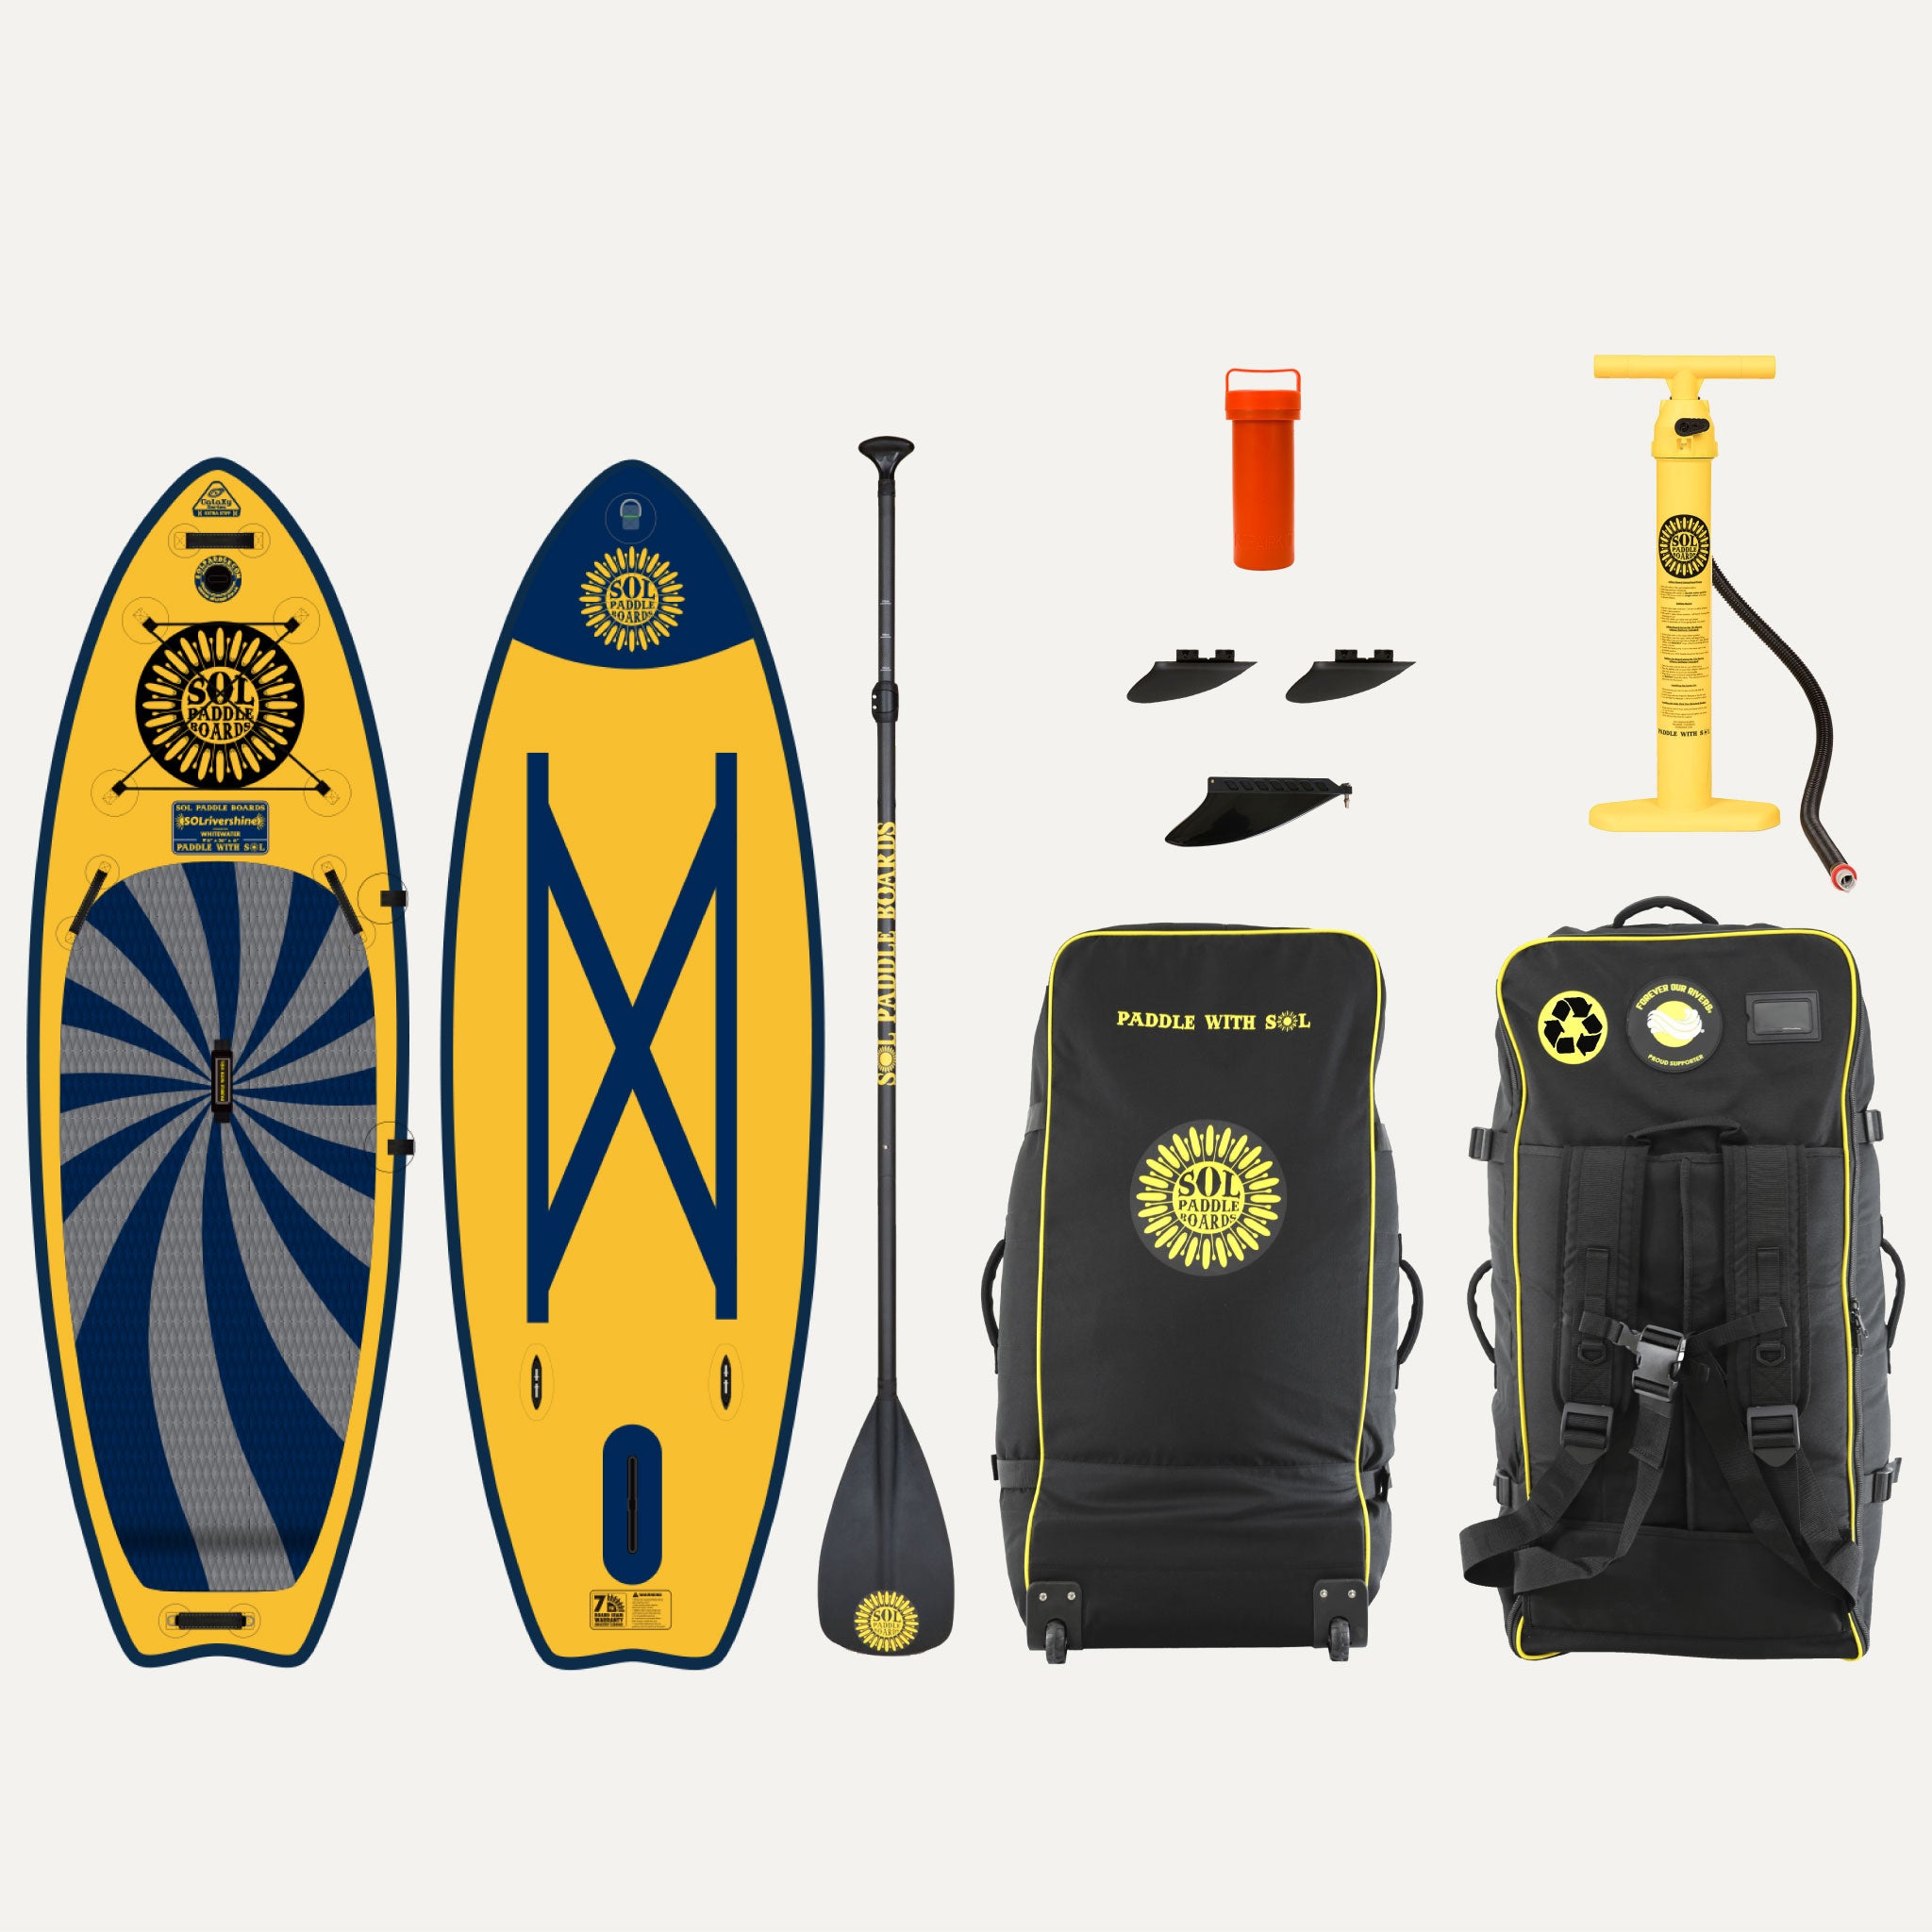 GalaXy SOLrivershine Inflatable Paddle Board showcasing the top and bottom views of the SUP board and the accessories that come with it